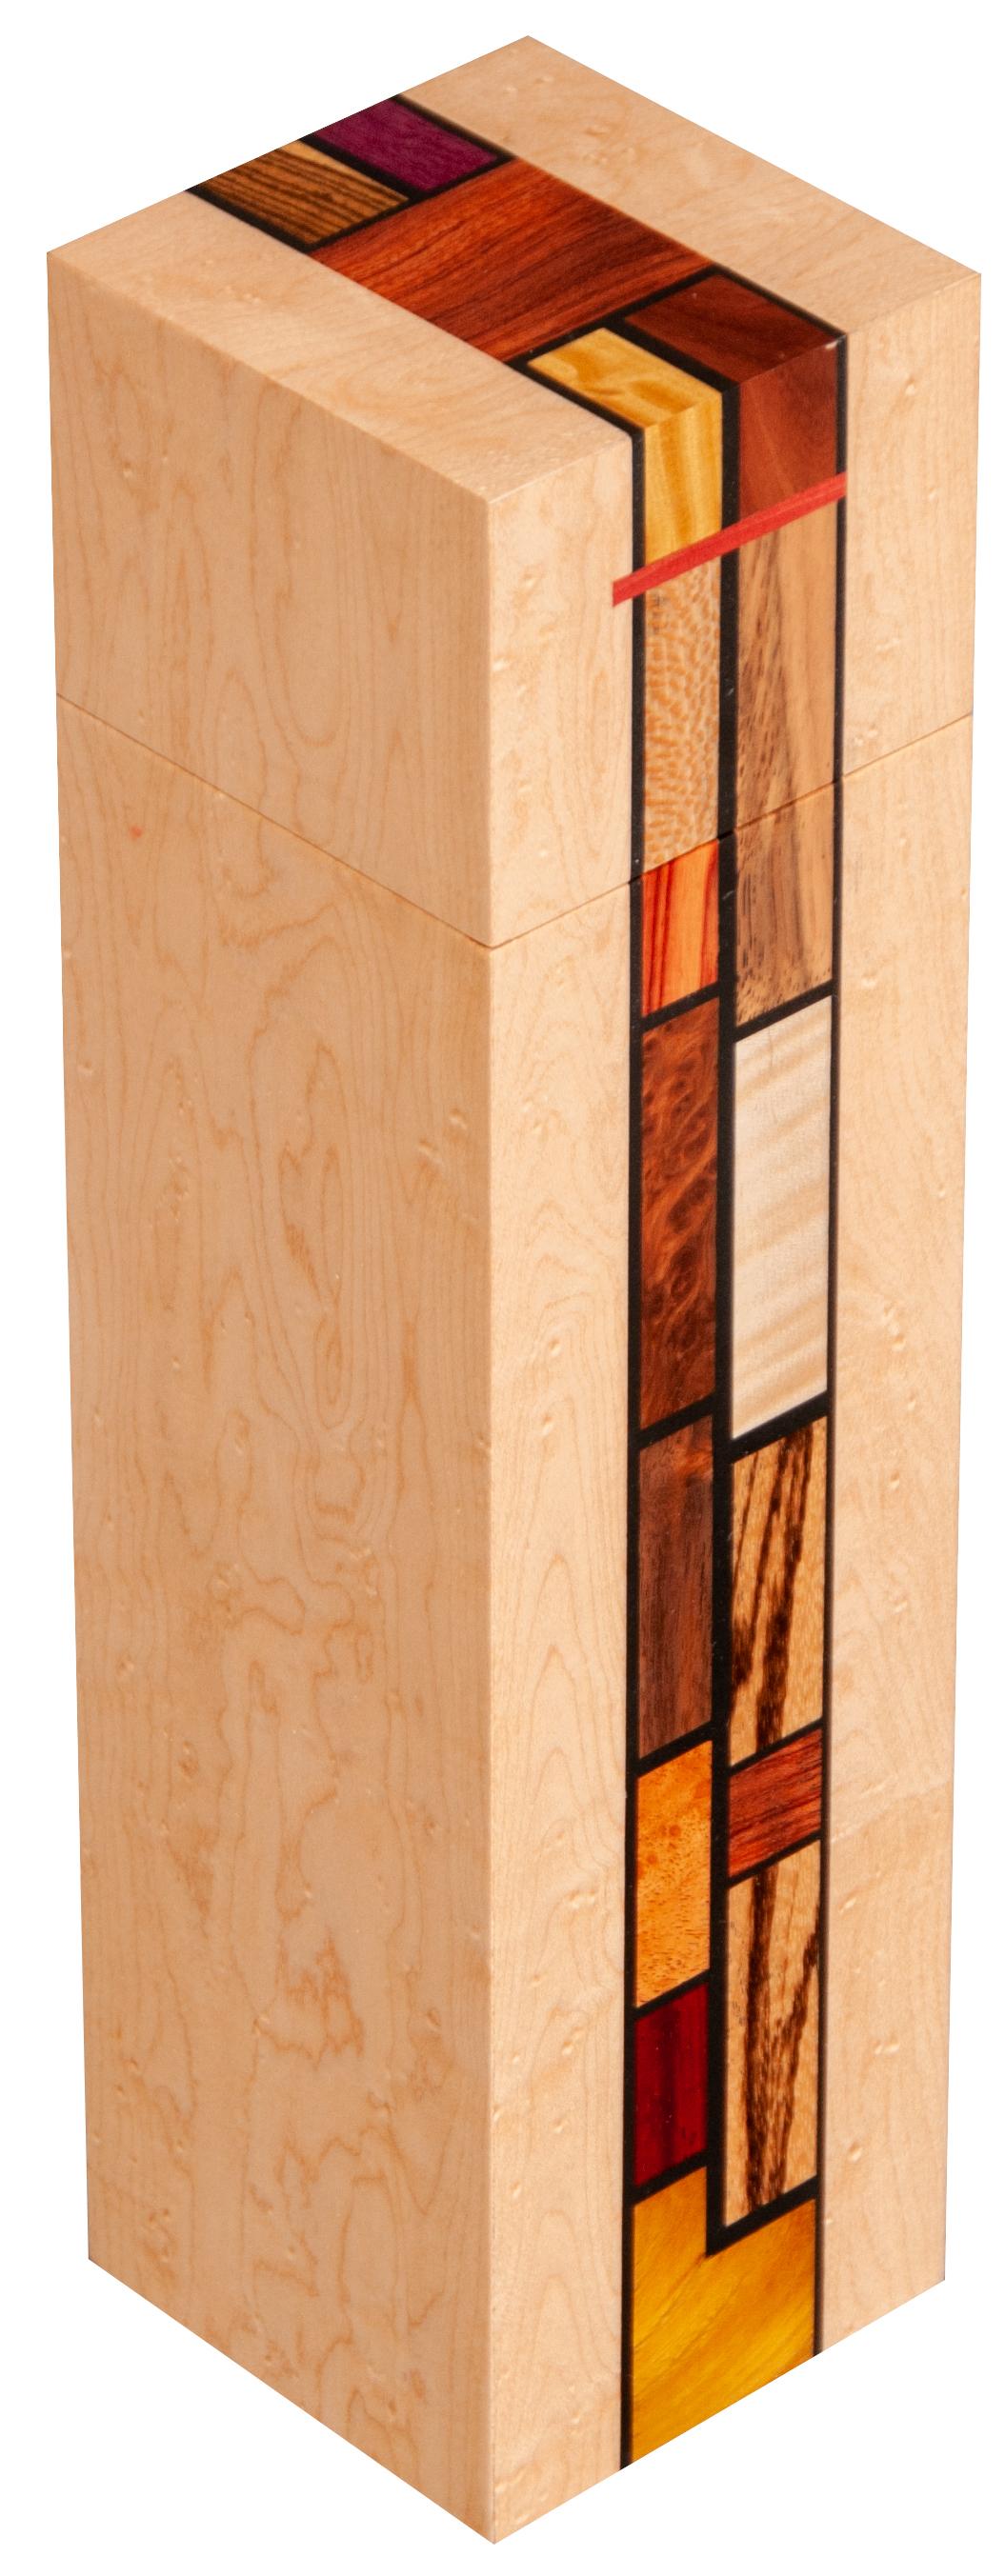 This art box were designed and constructed to be both decorative as well as useful as urns for cremation ashes. They are decorated with our mosaic work that embodies the De Stijl art movement of 1918 in particularity the rectilinear work of Piet